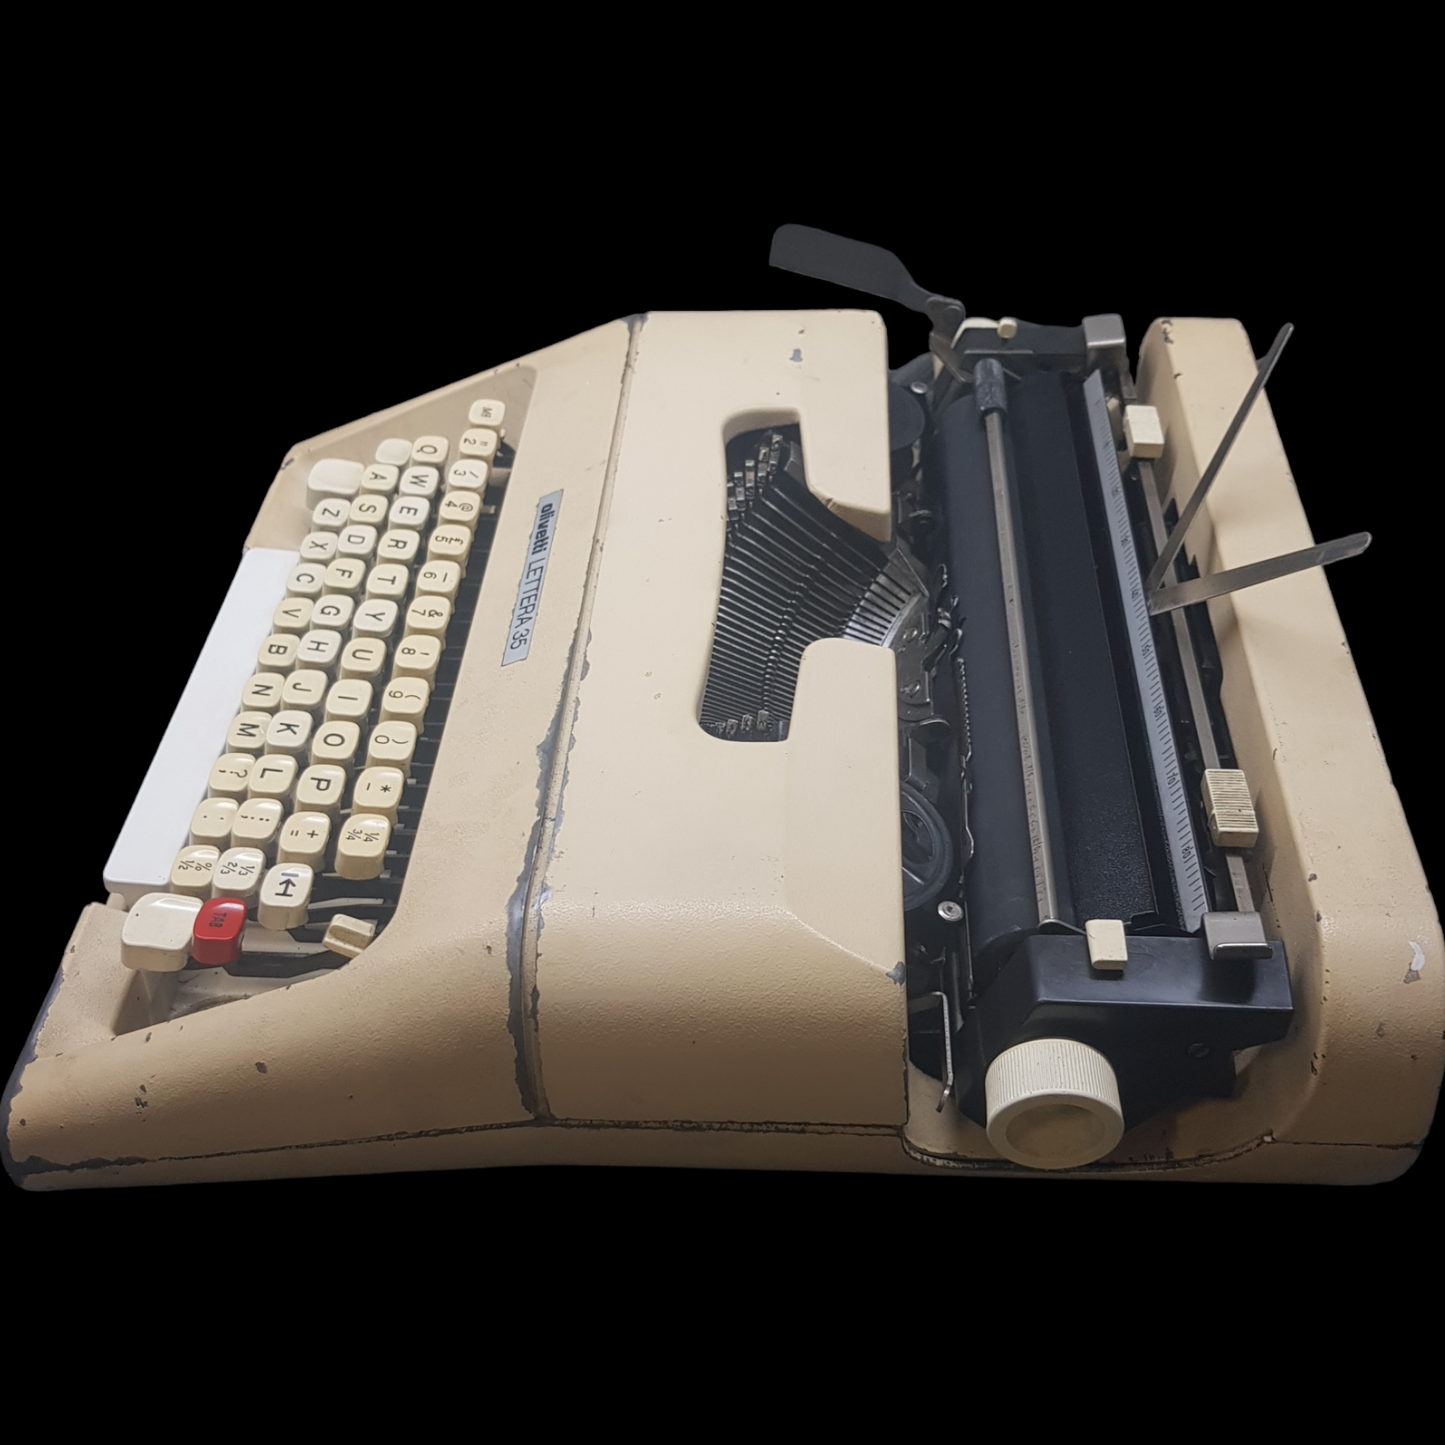 Image of Olivetti Lettera 35 Typewriter. Portable Typewriter. Made in Europe. Available with cover. Available from universaltypewritercompany.in